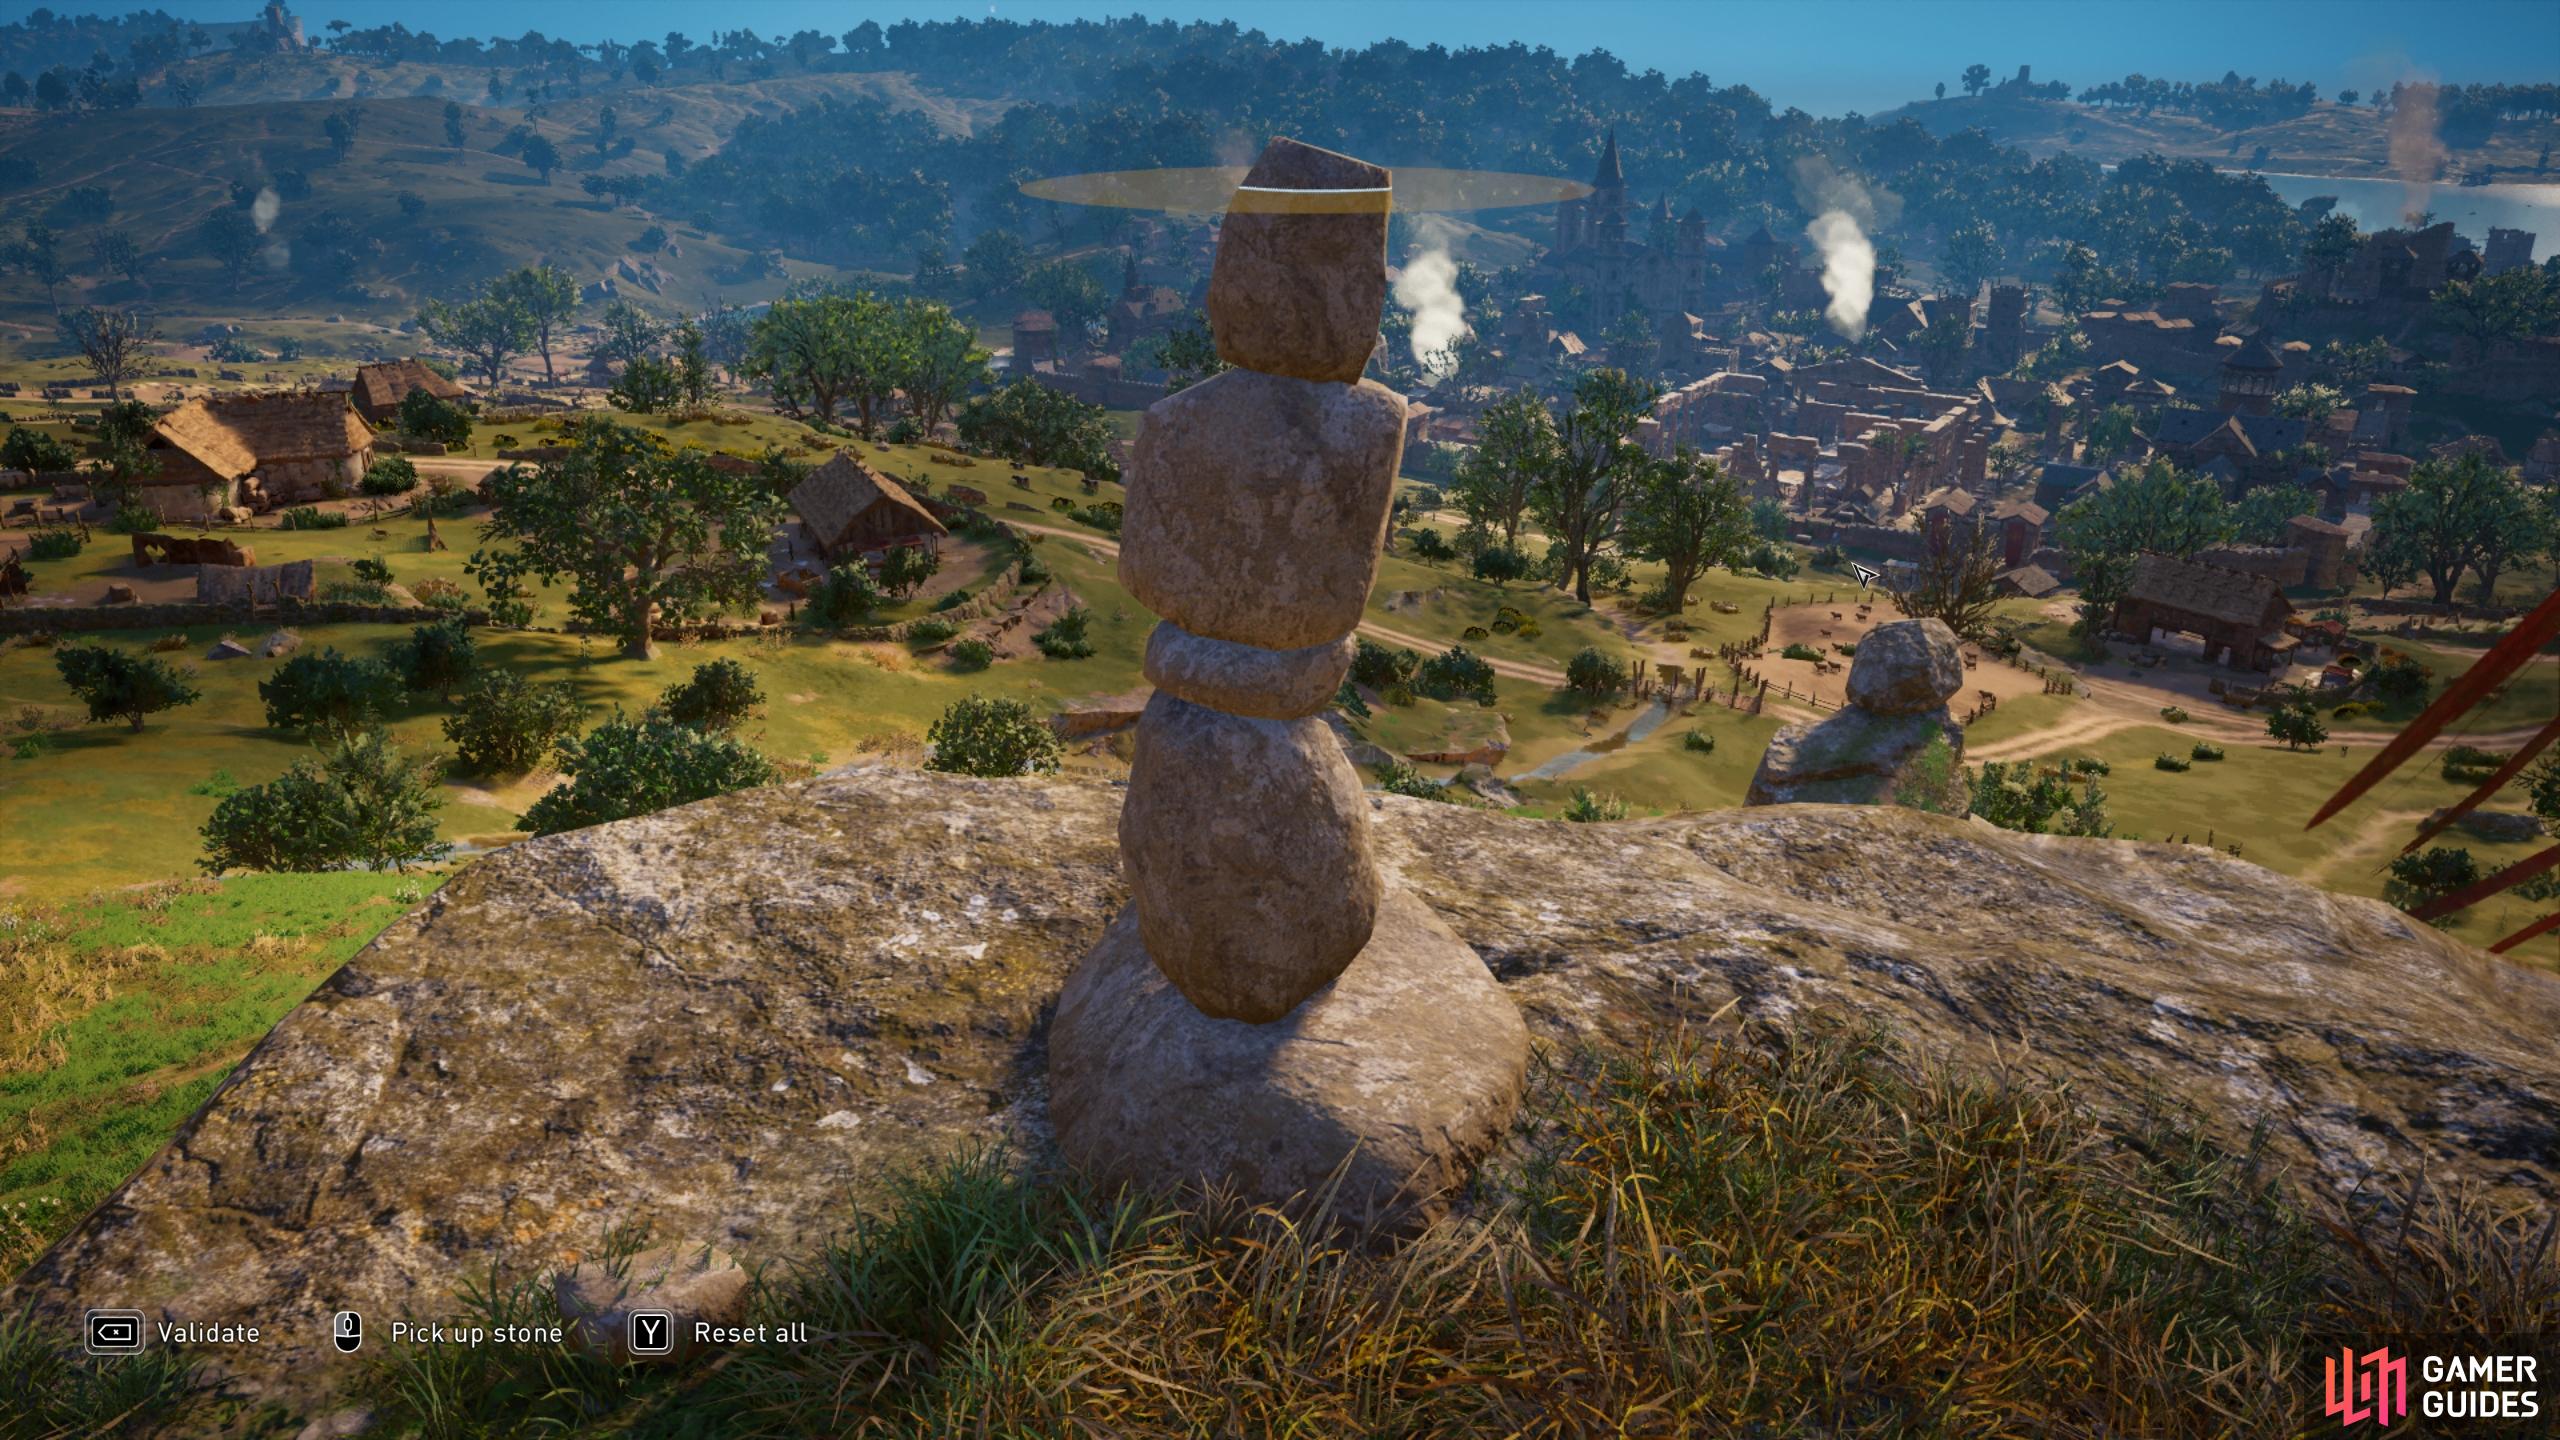 Stack the large stones vertically to reach the required height threshold.